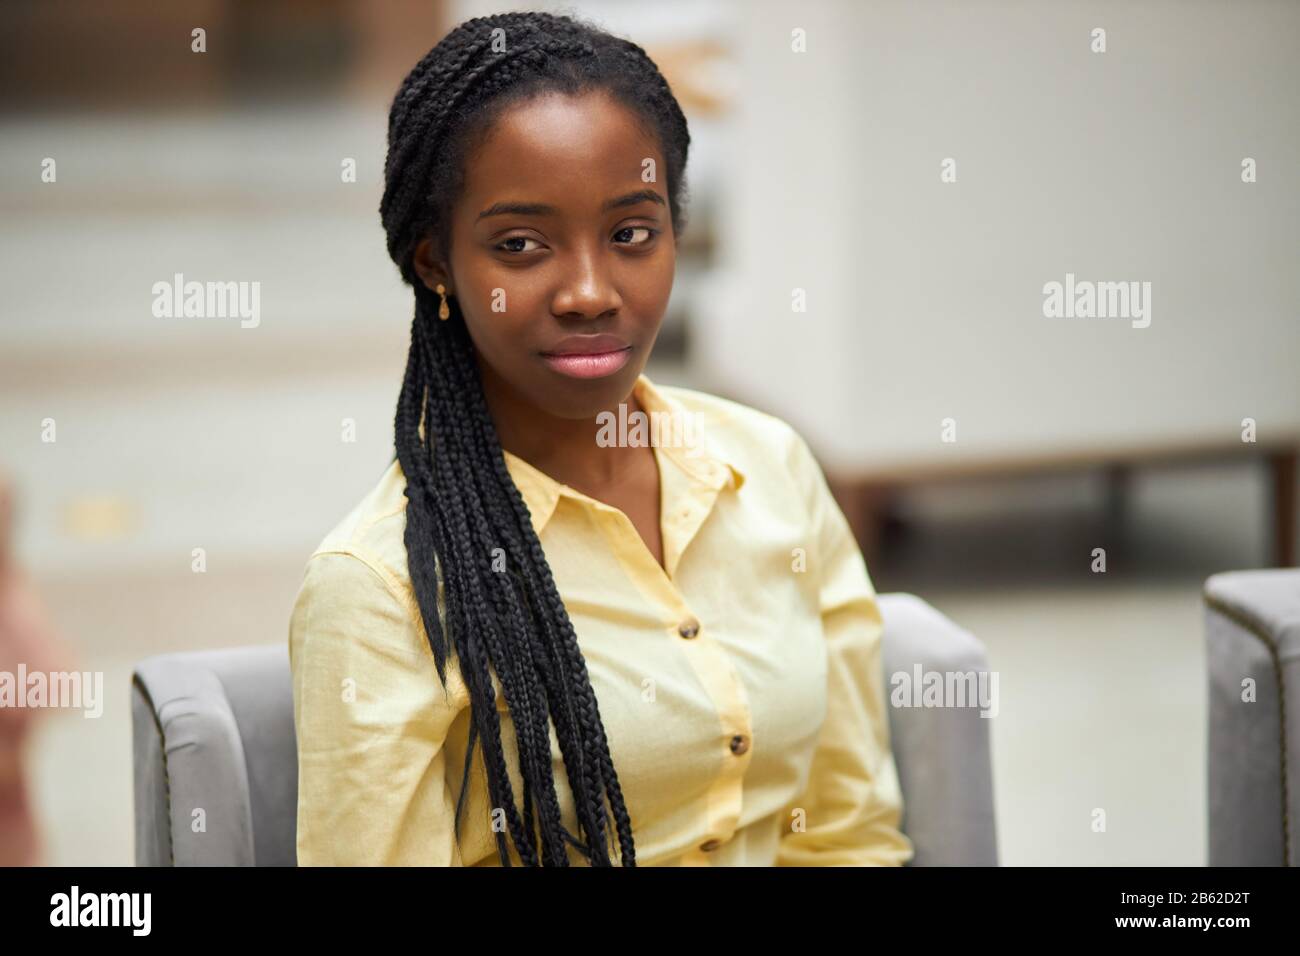 young attractive serious pensive thoughtful afro-american woman in stylish yellow shirt looking aside, thinking about her business, planning her day, Stock Photo